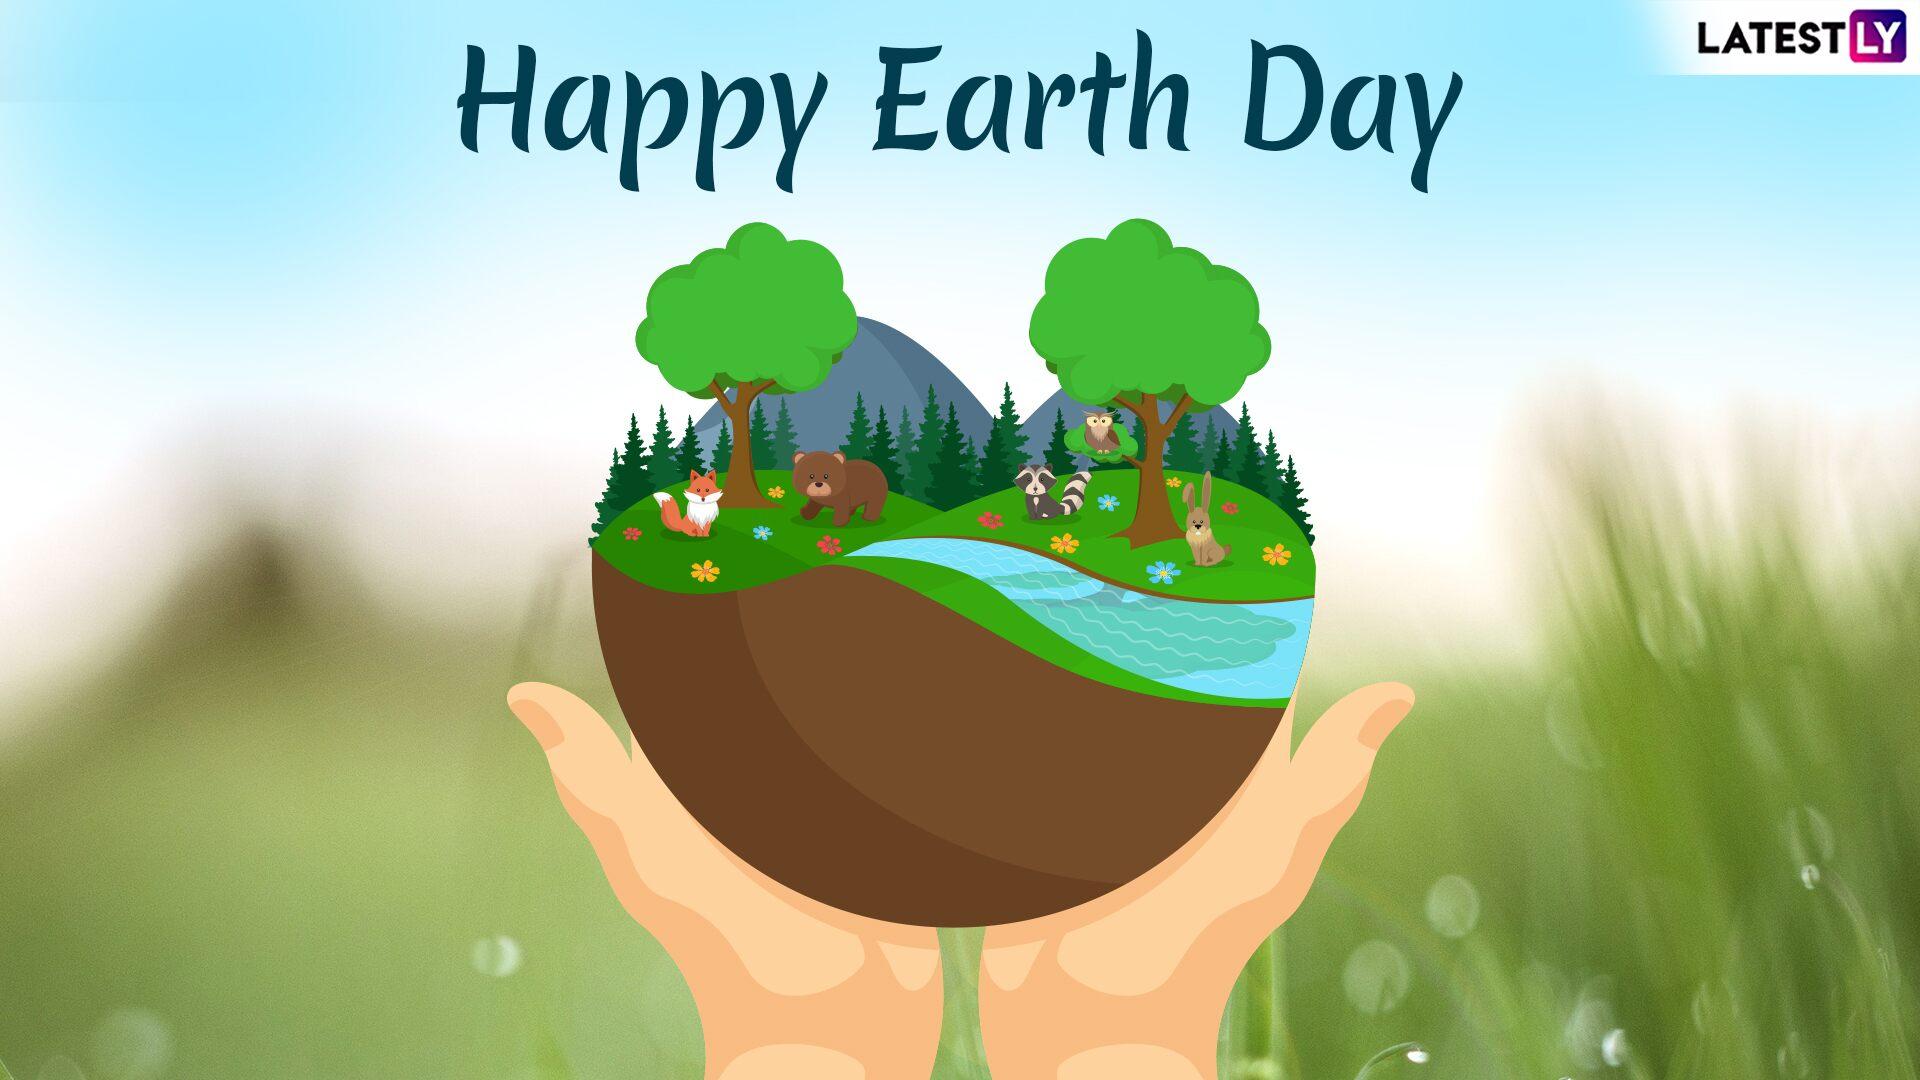 Earth Day 2019 Image & HD Wallpaper for Free Download Online